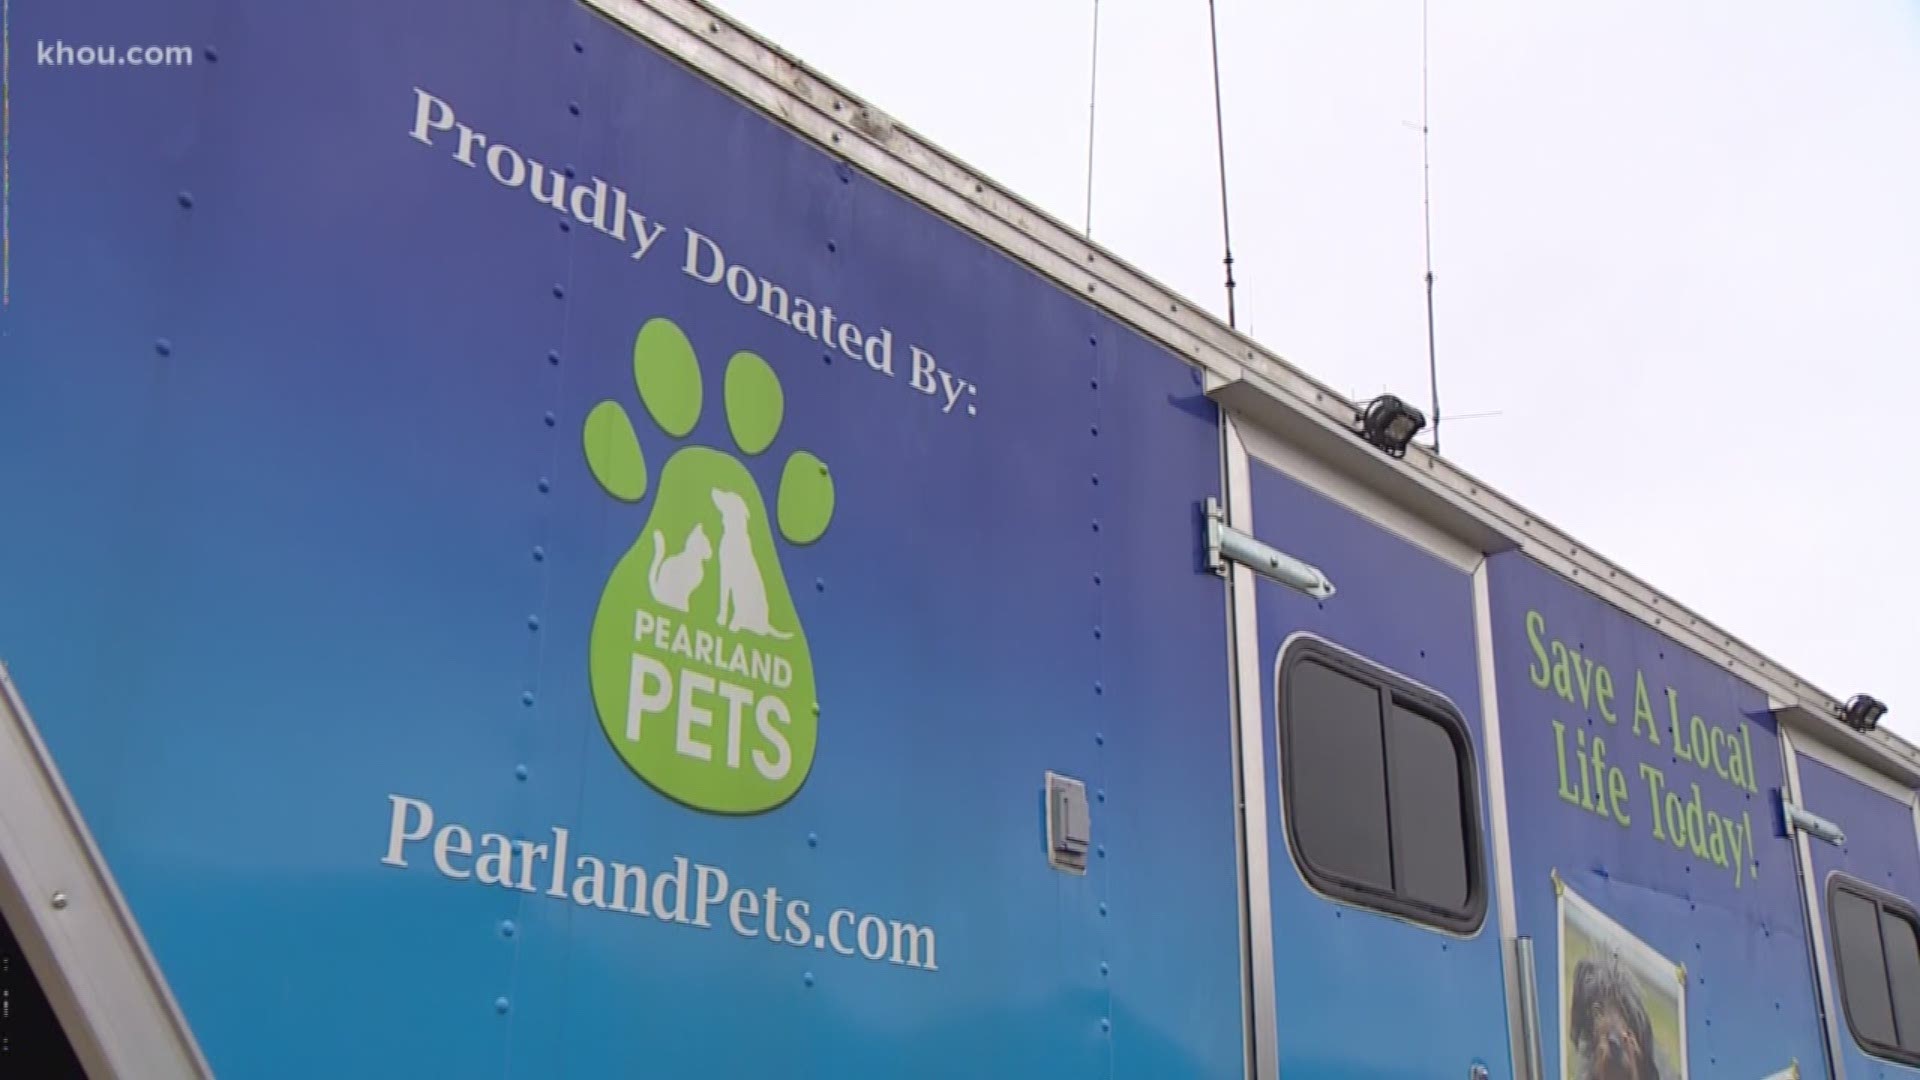 A Pearland non profit organization is offering free pet food to government employees affected by the ongoing government shutdown.